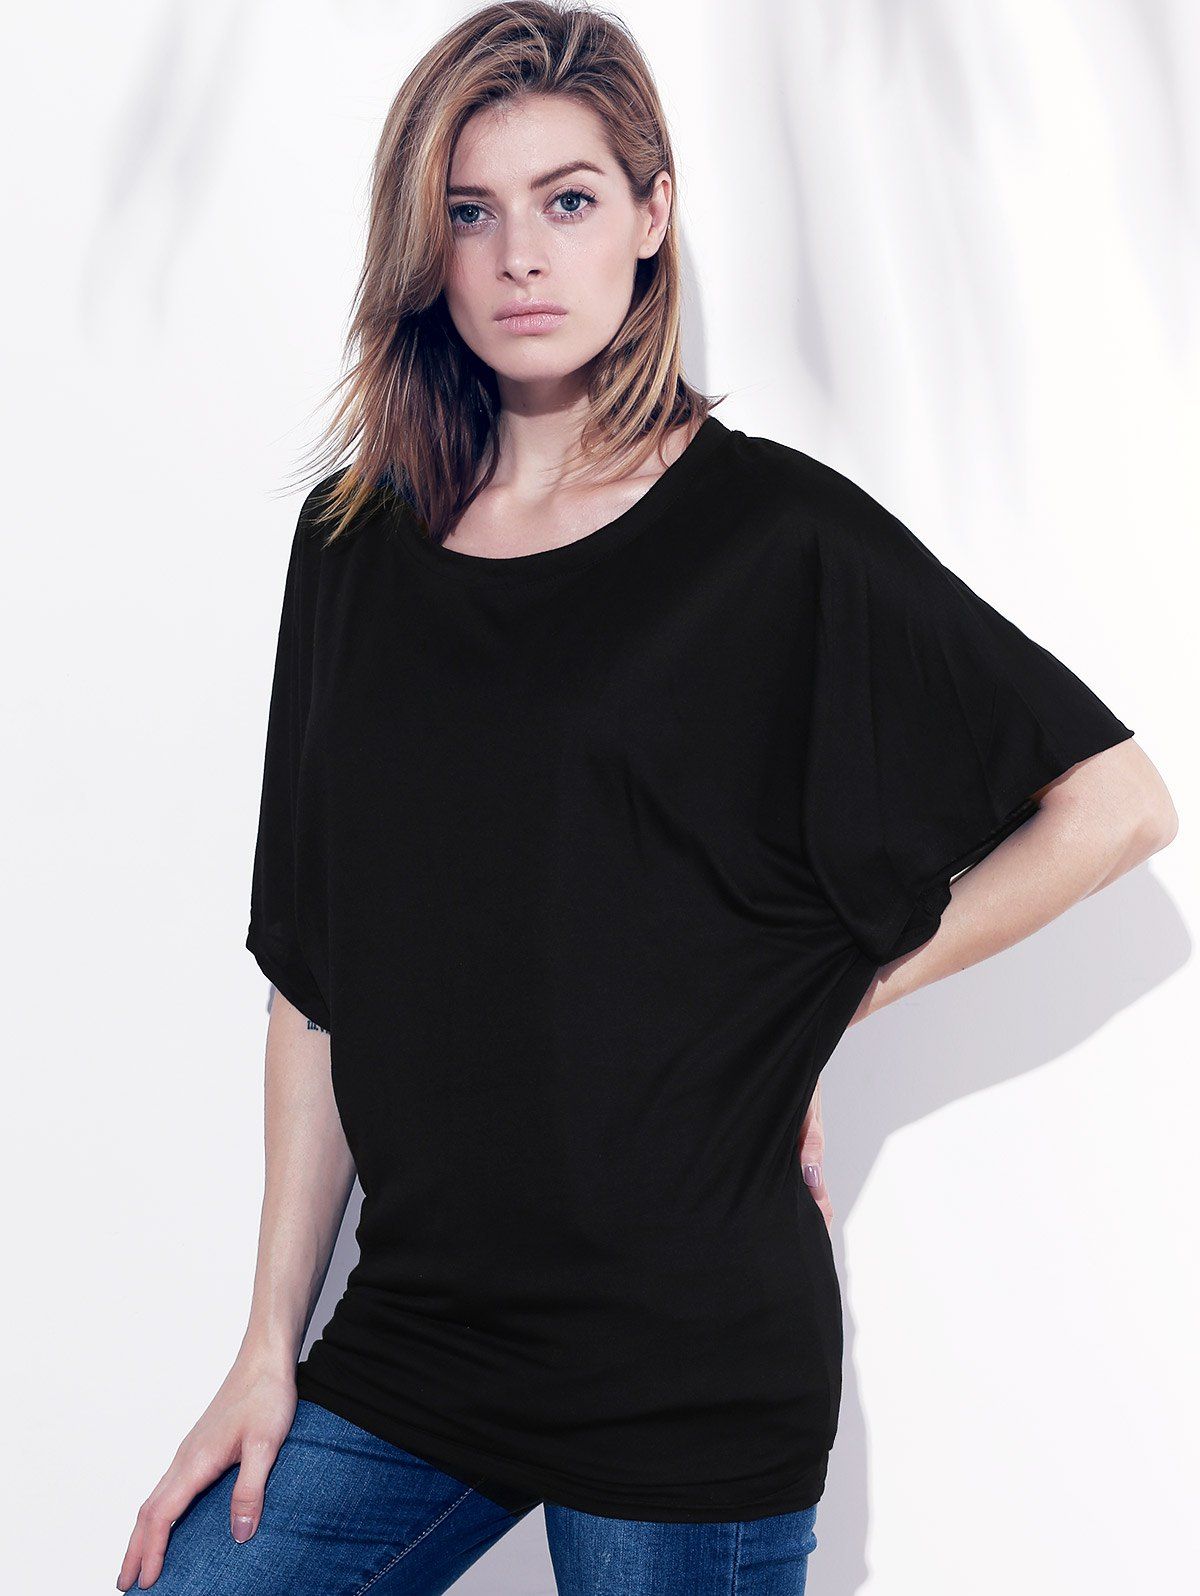 Stylish Boat Neck Short Sleeve Solid Color Women's T-Shirt, BLACK, XL in Tees & T-Shirts 